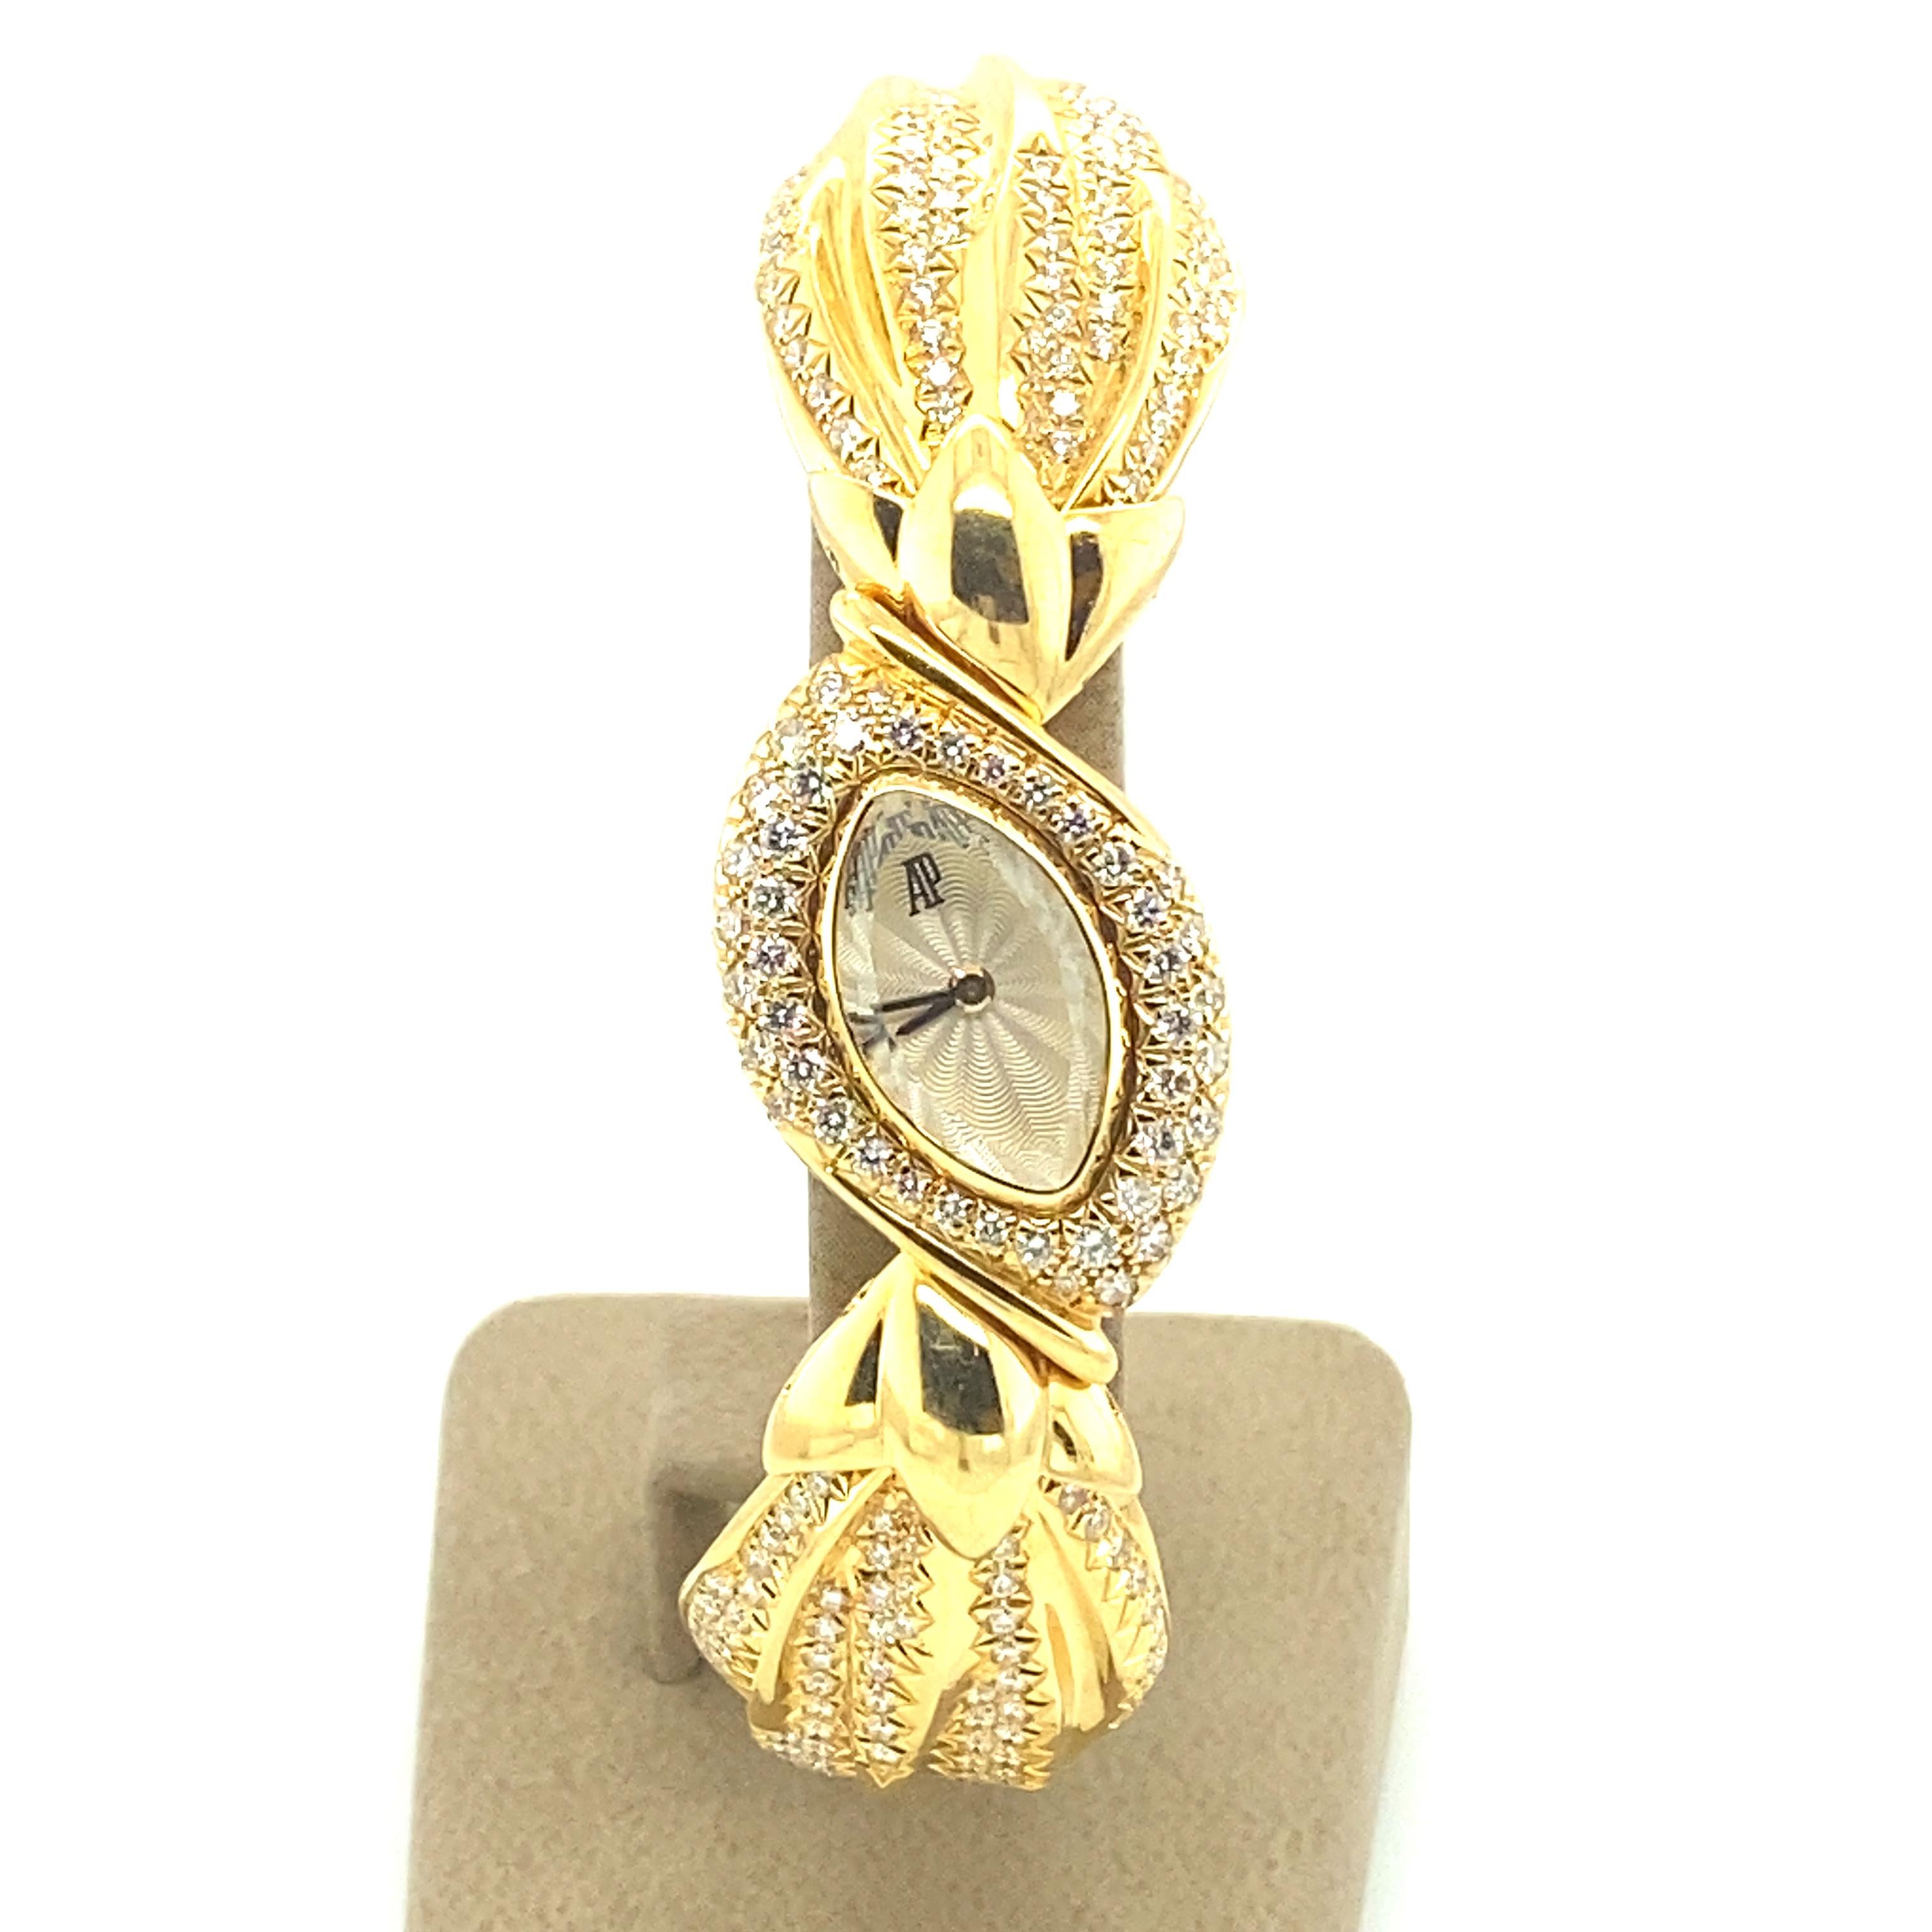 Rare Audemars Piguet ladies cocktail watch ref. 25468. Bow-shaped case and bracelet in yellow gold 18 karat. The three moving elements are pavé set with a total of 222 full brilliant-cut diamonds totalling approximate 2.20 ct of diamonds. 

Silver